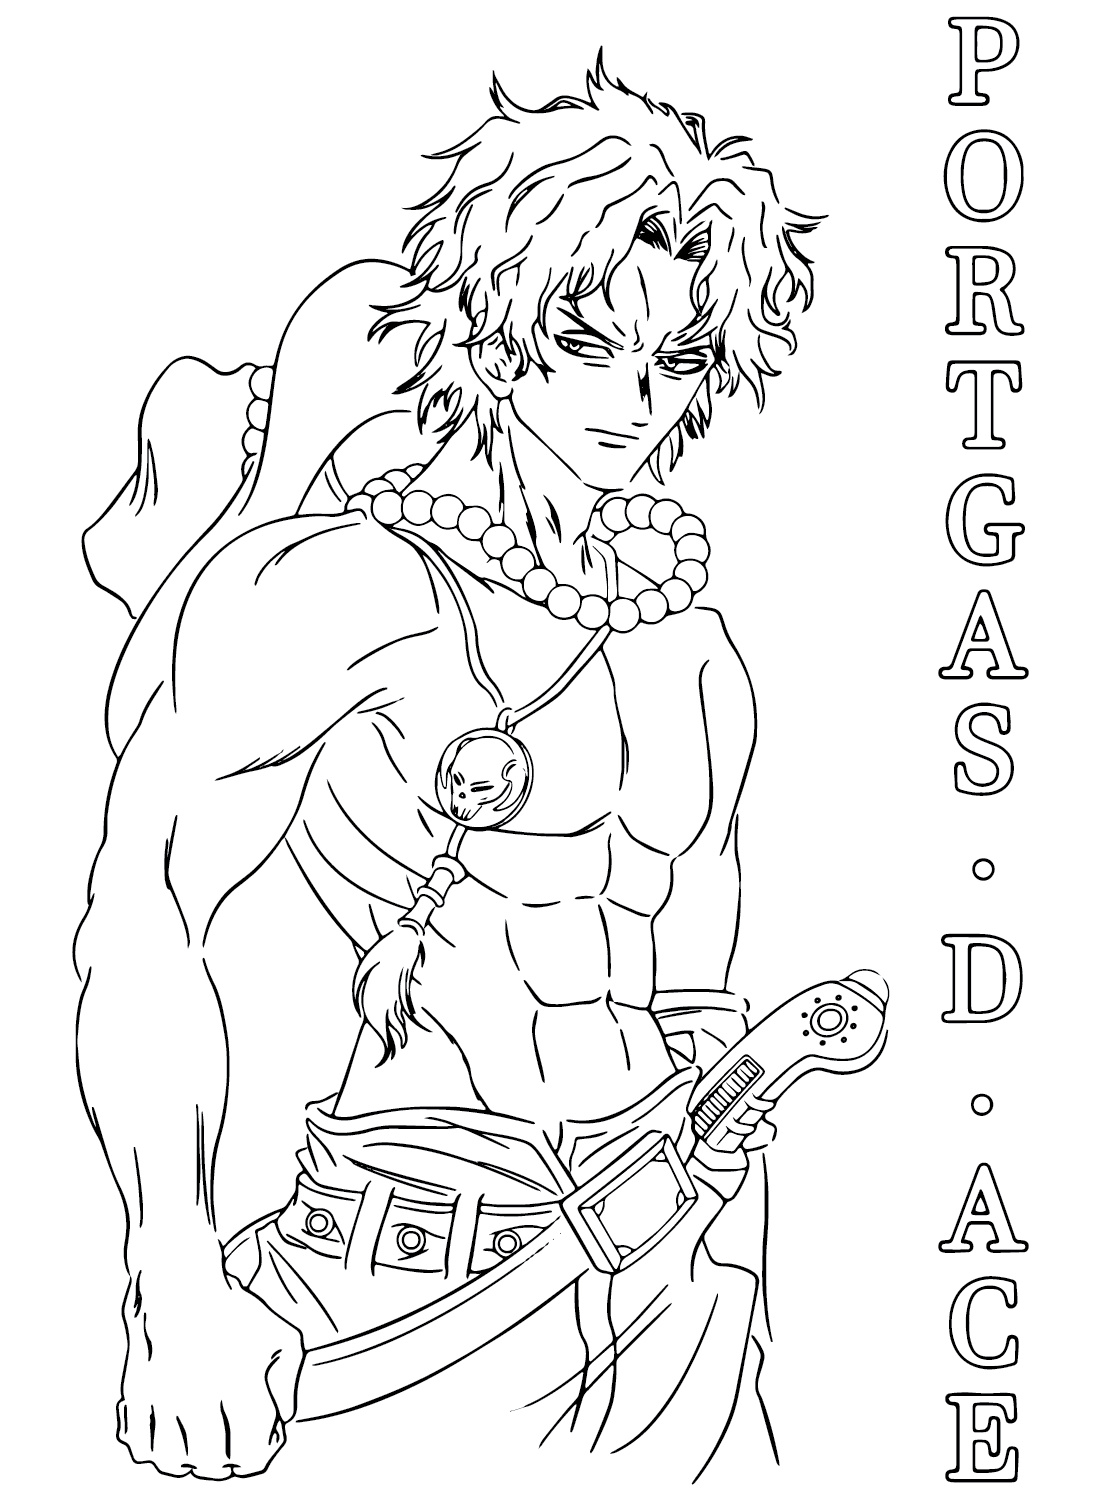 Portgas D. Ace Pictures to Color from Portgas D. Ace